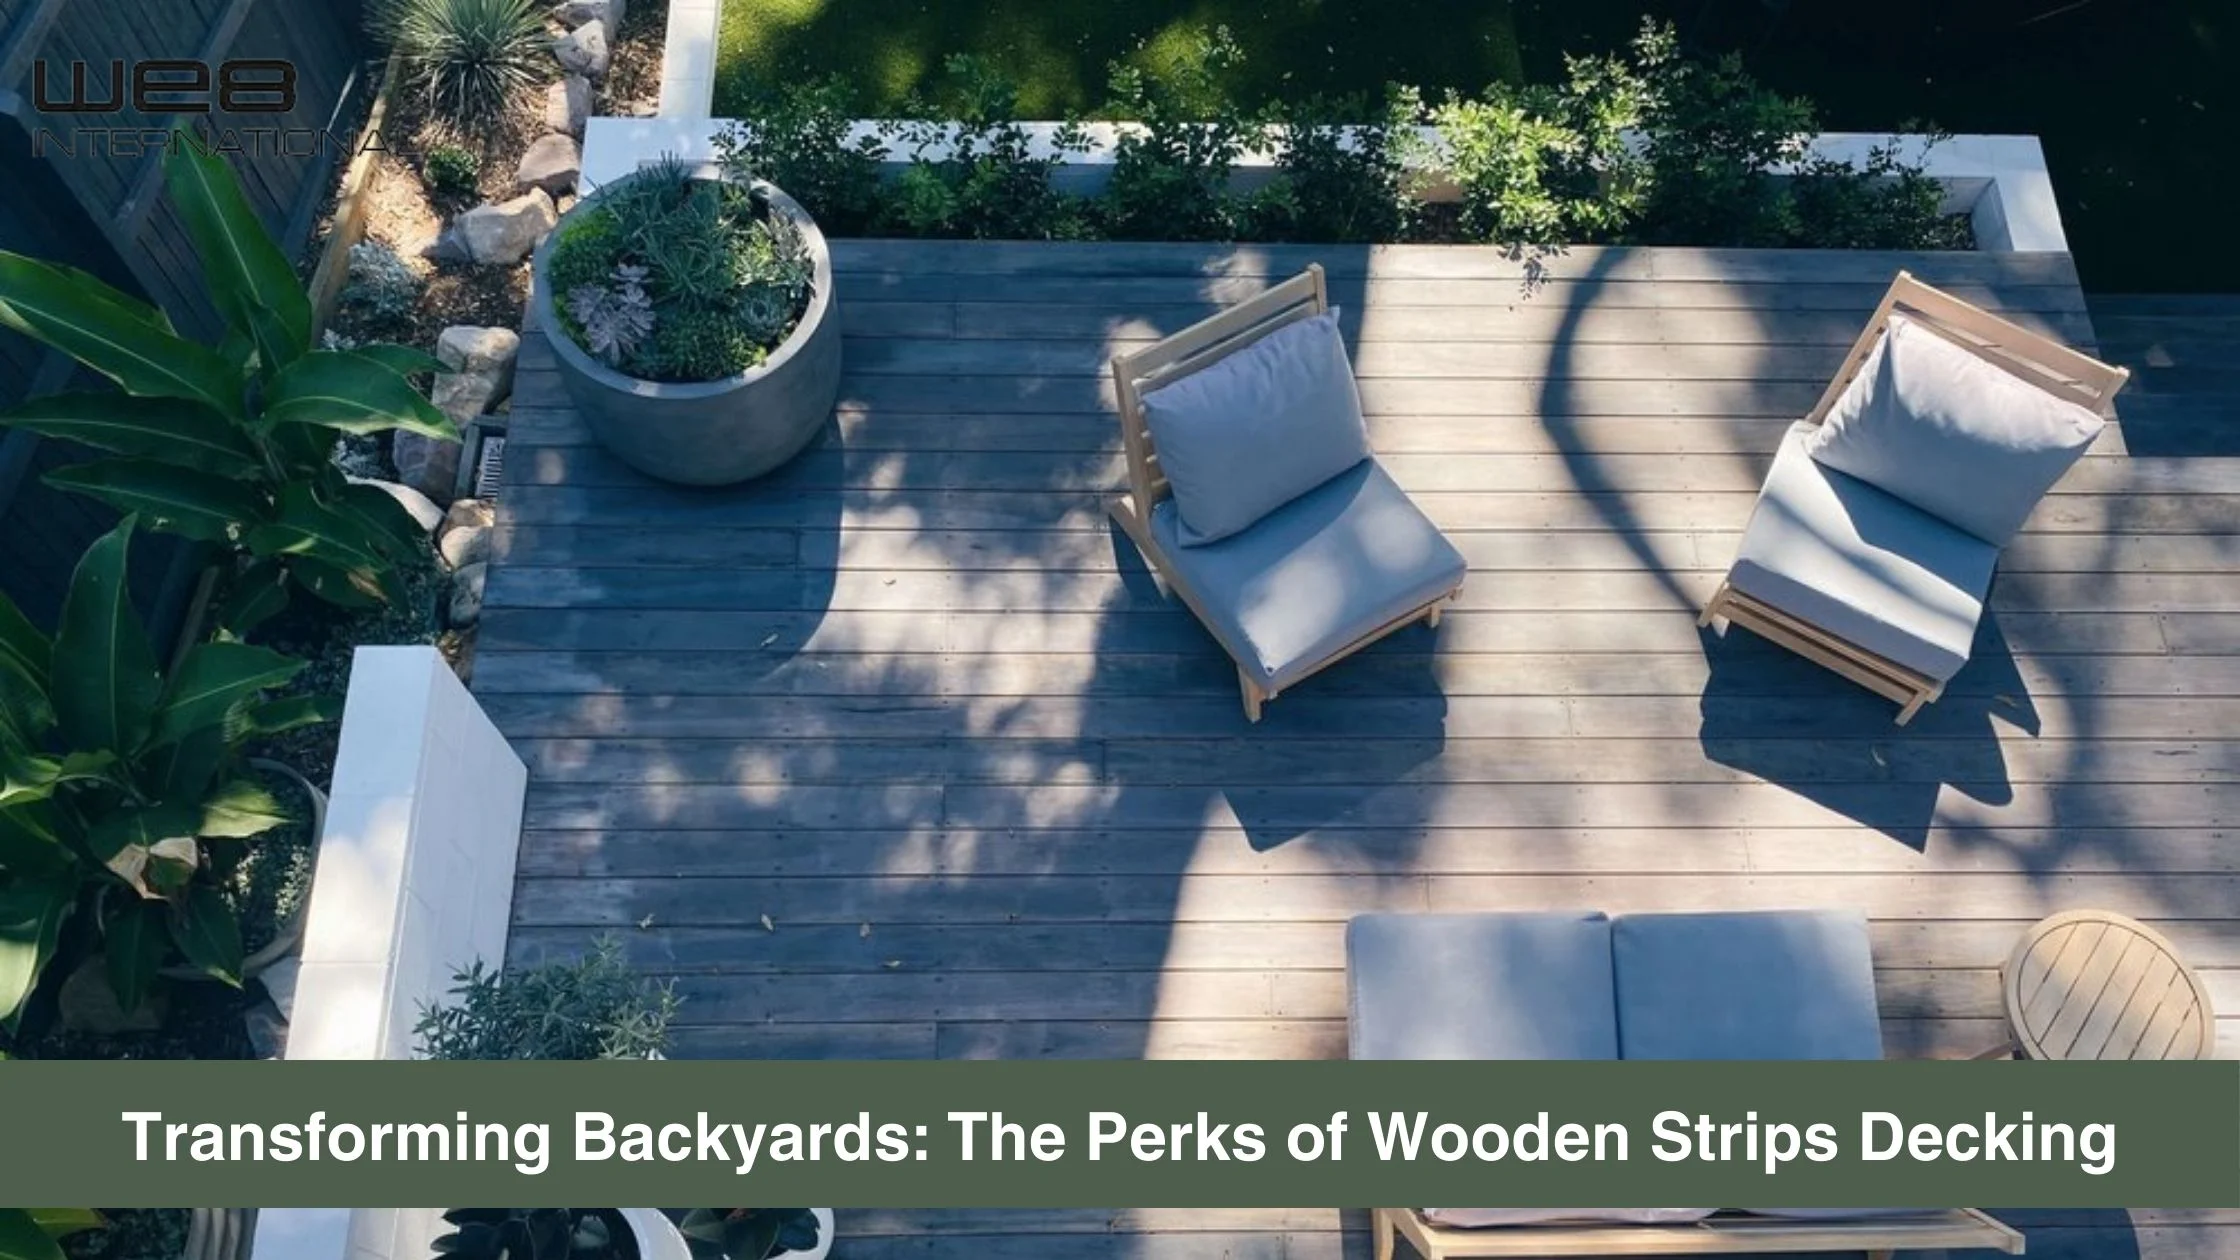 Transforming Backyards: The Perks of Wooden Strips Decking